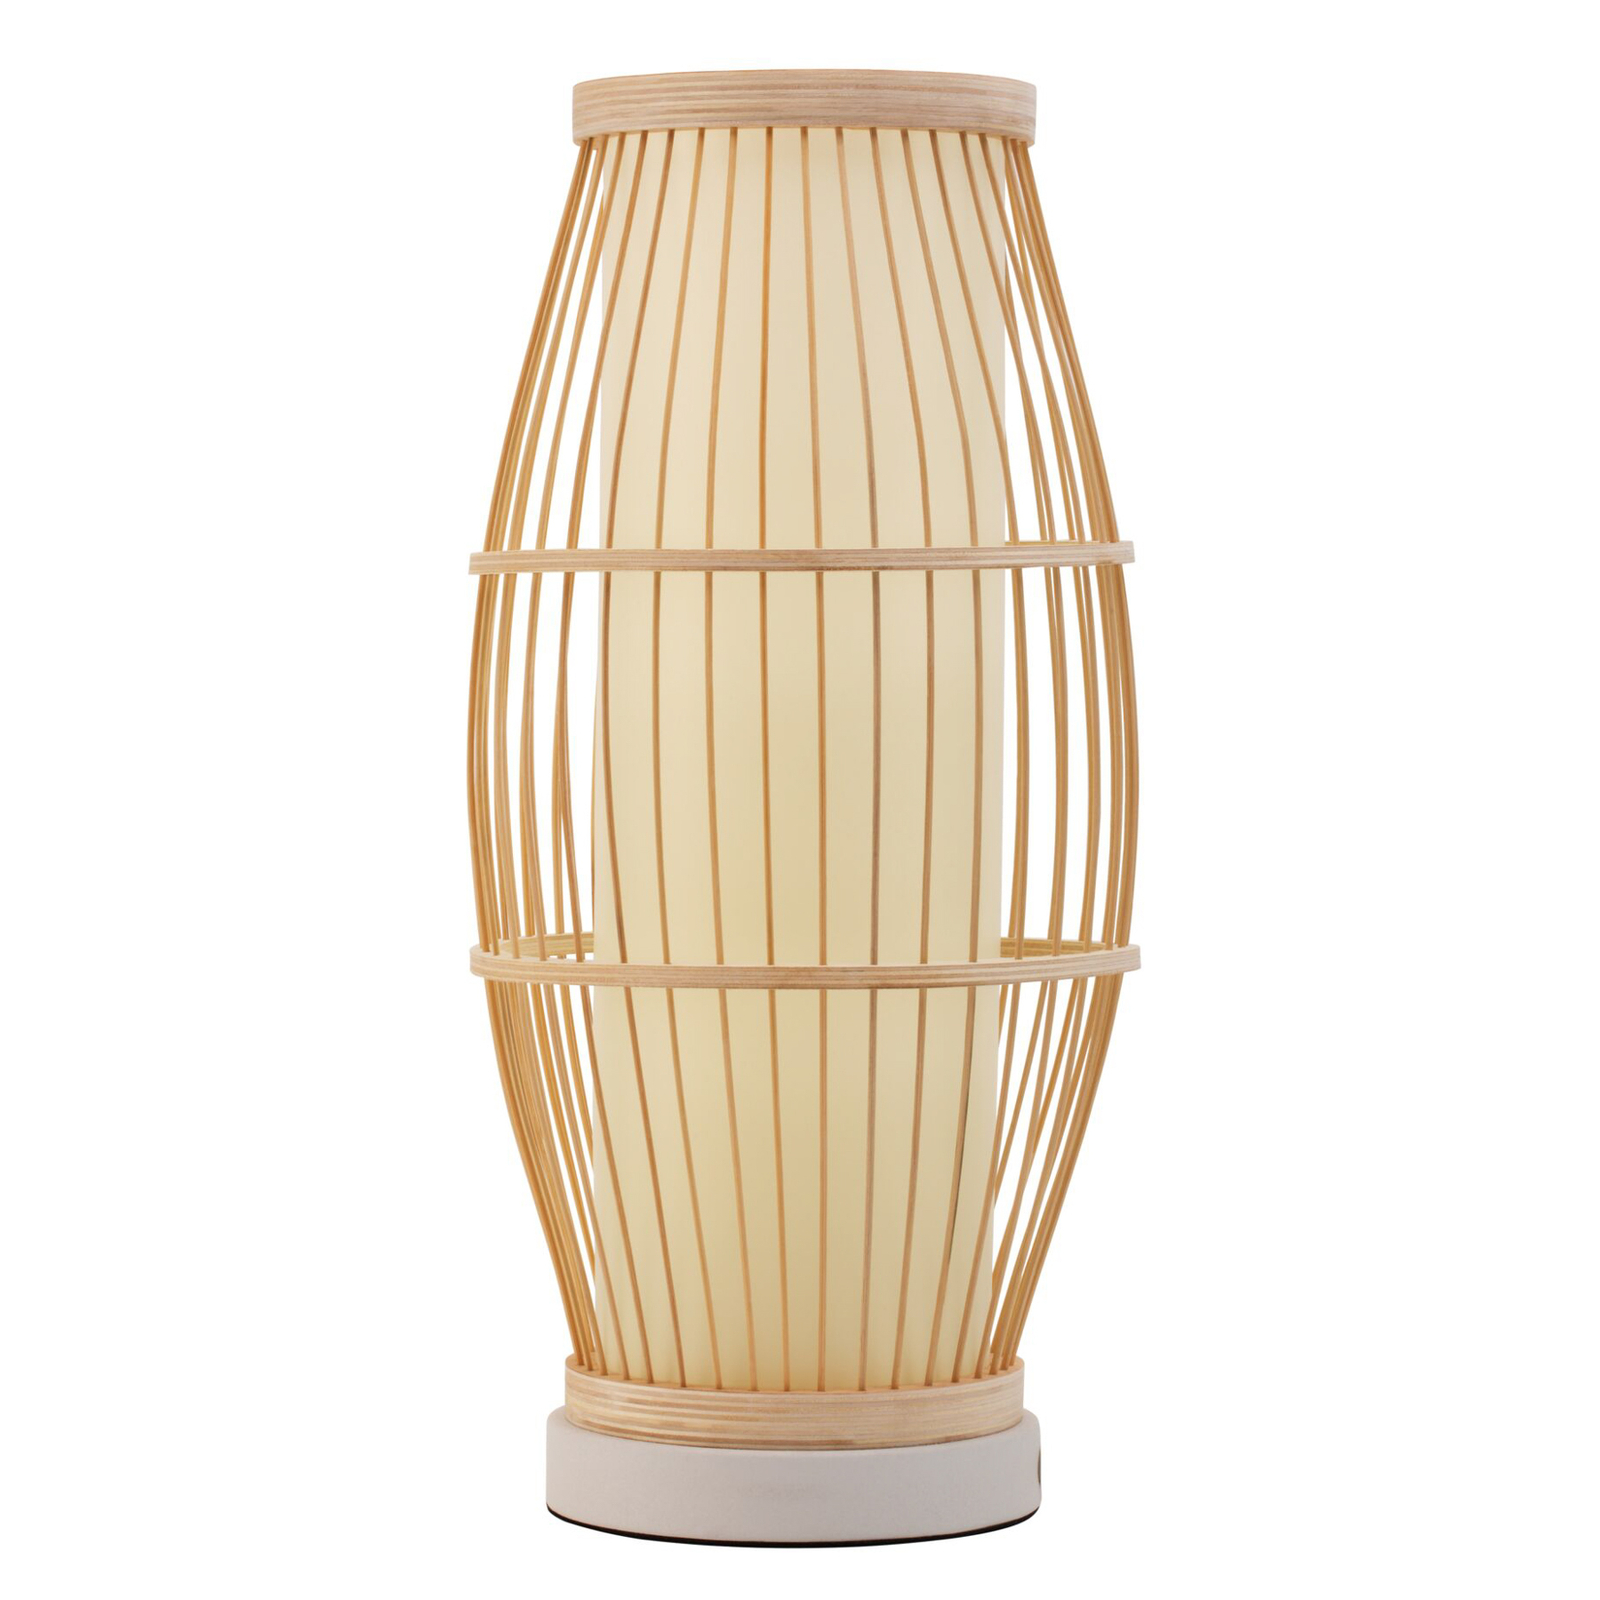 Pauleen Woody Passion table lamp made of bamboo